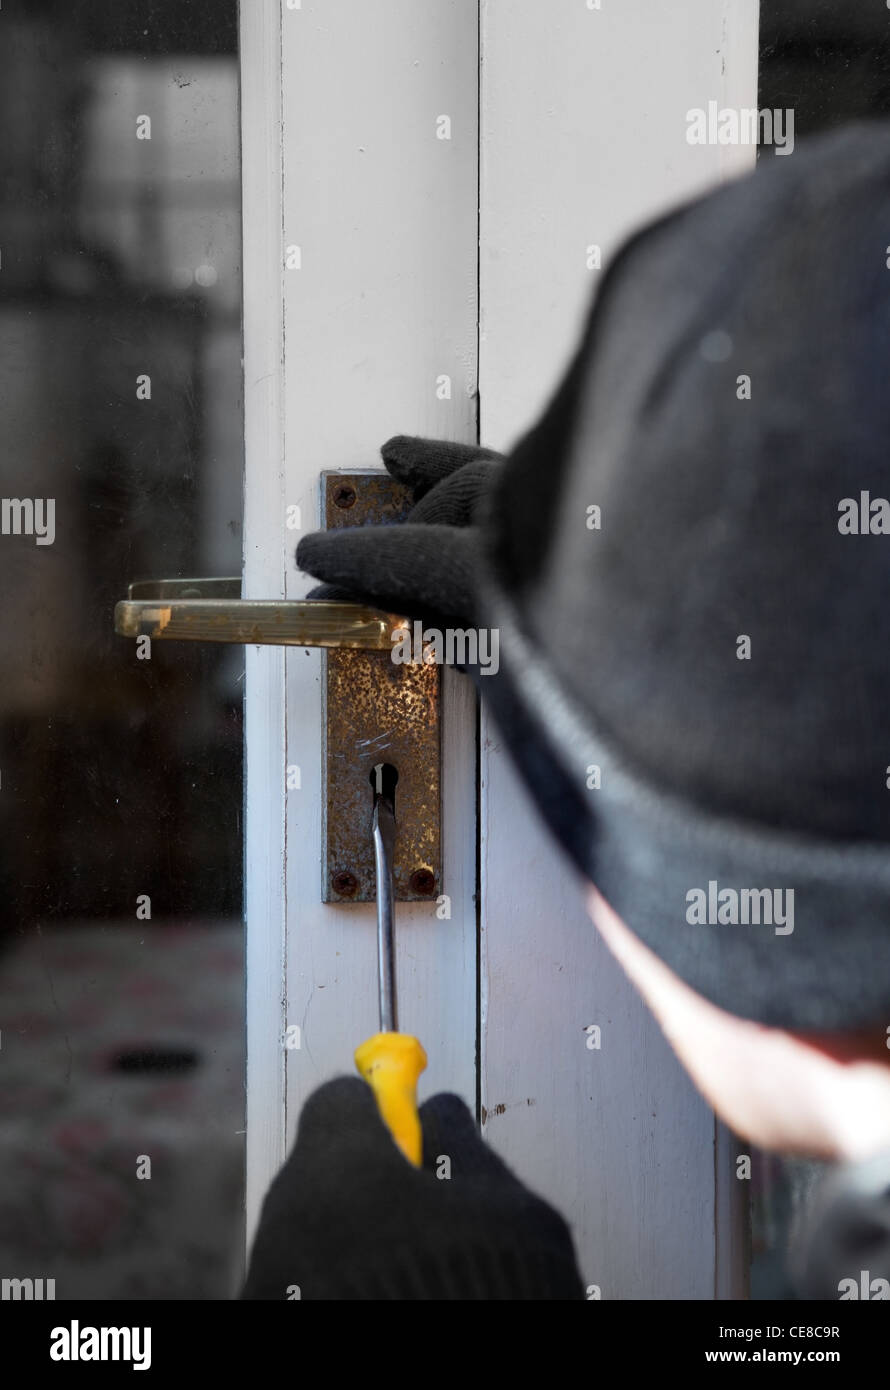 Breaking and entering home or house, Burglar with screwdriver force open door. Thief attempting to breach security Stock Photo